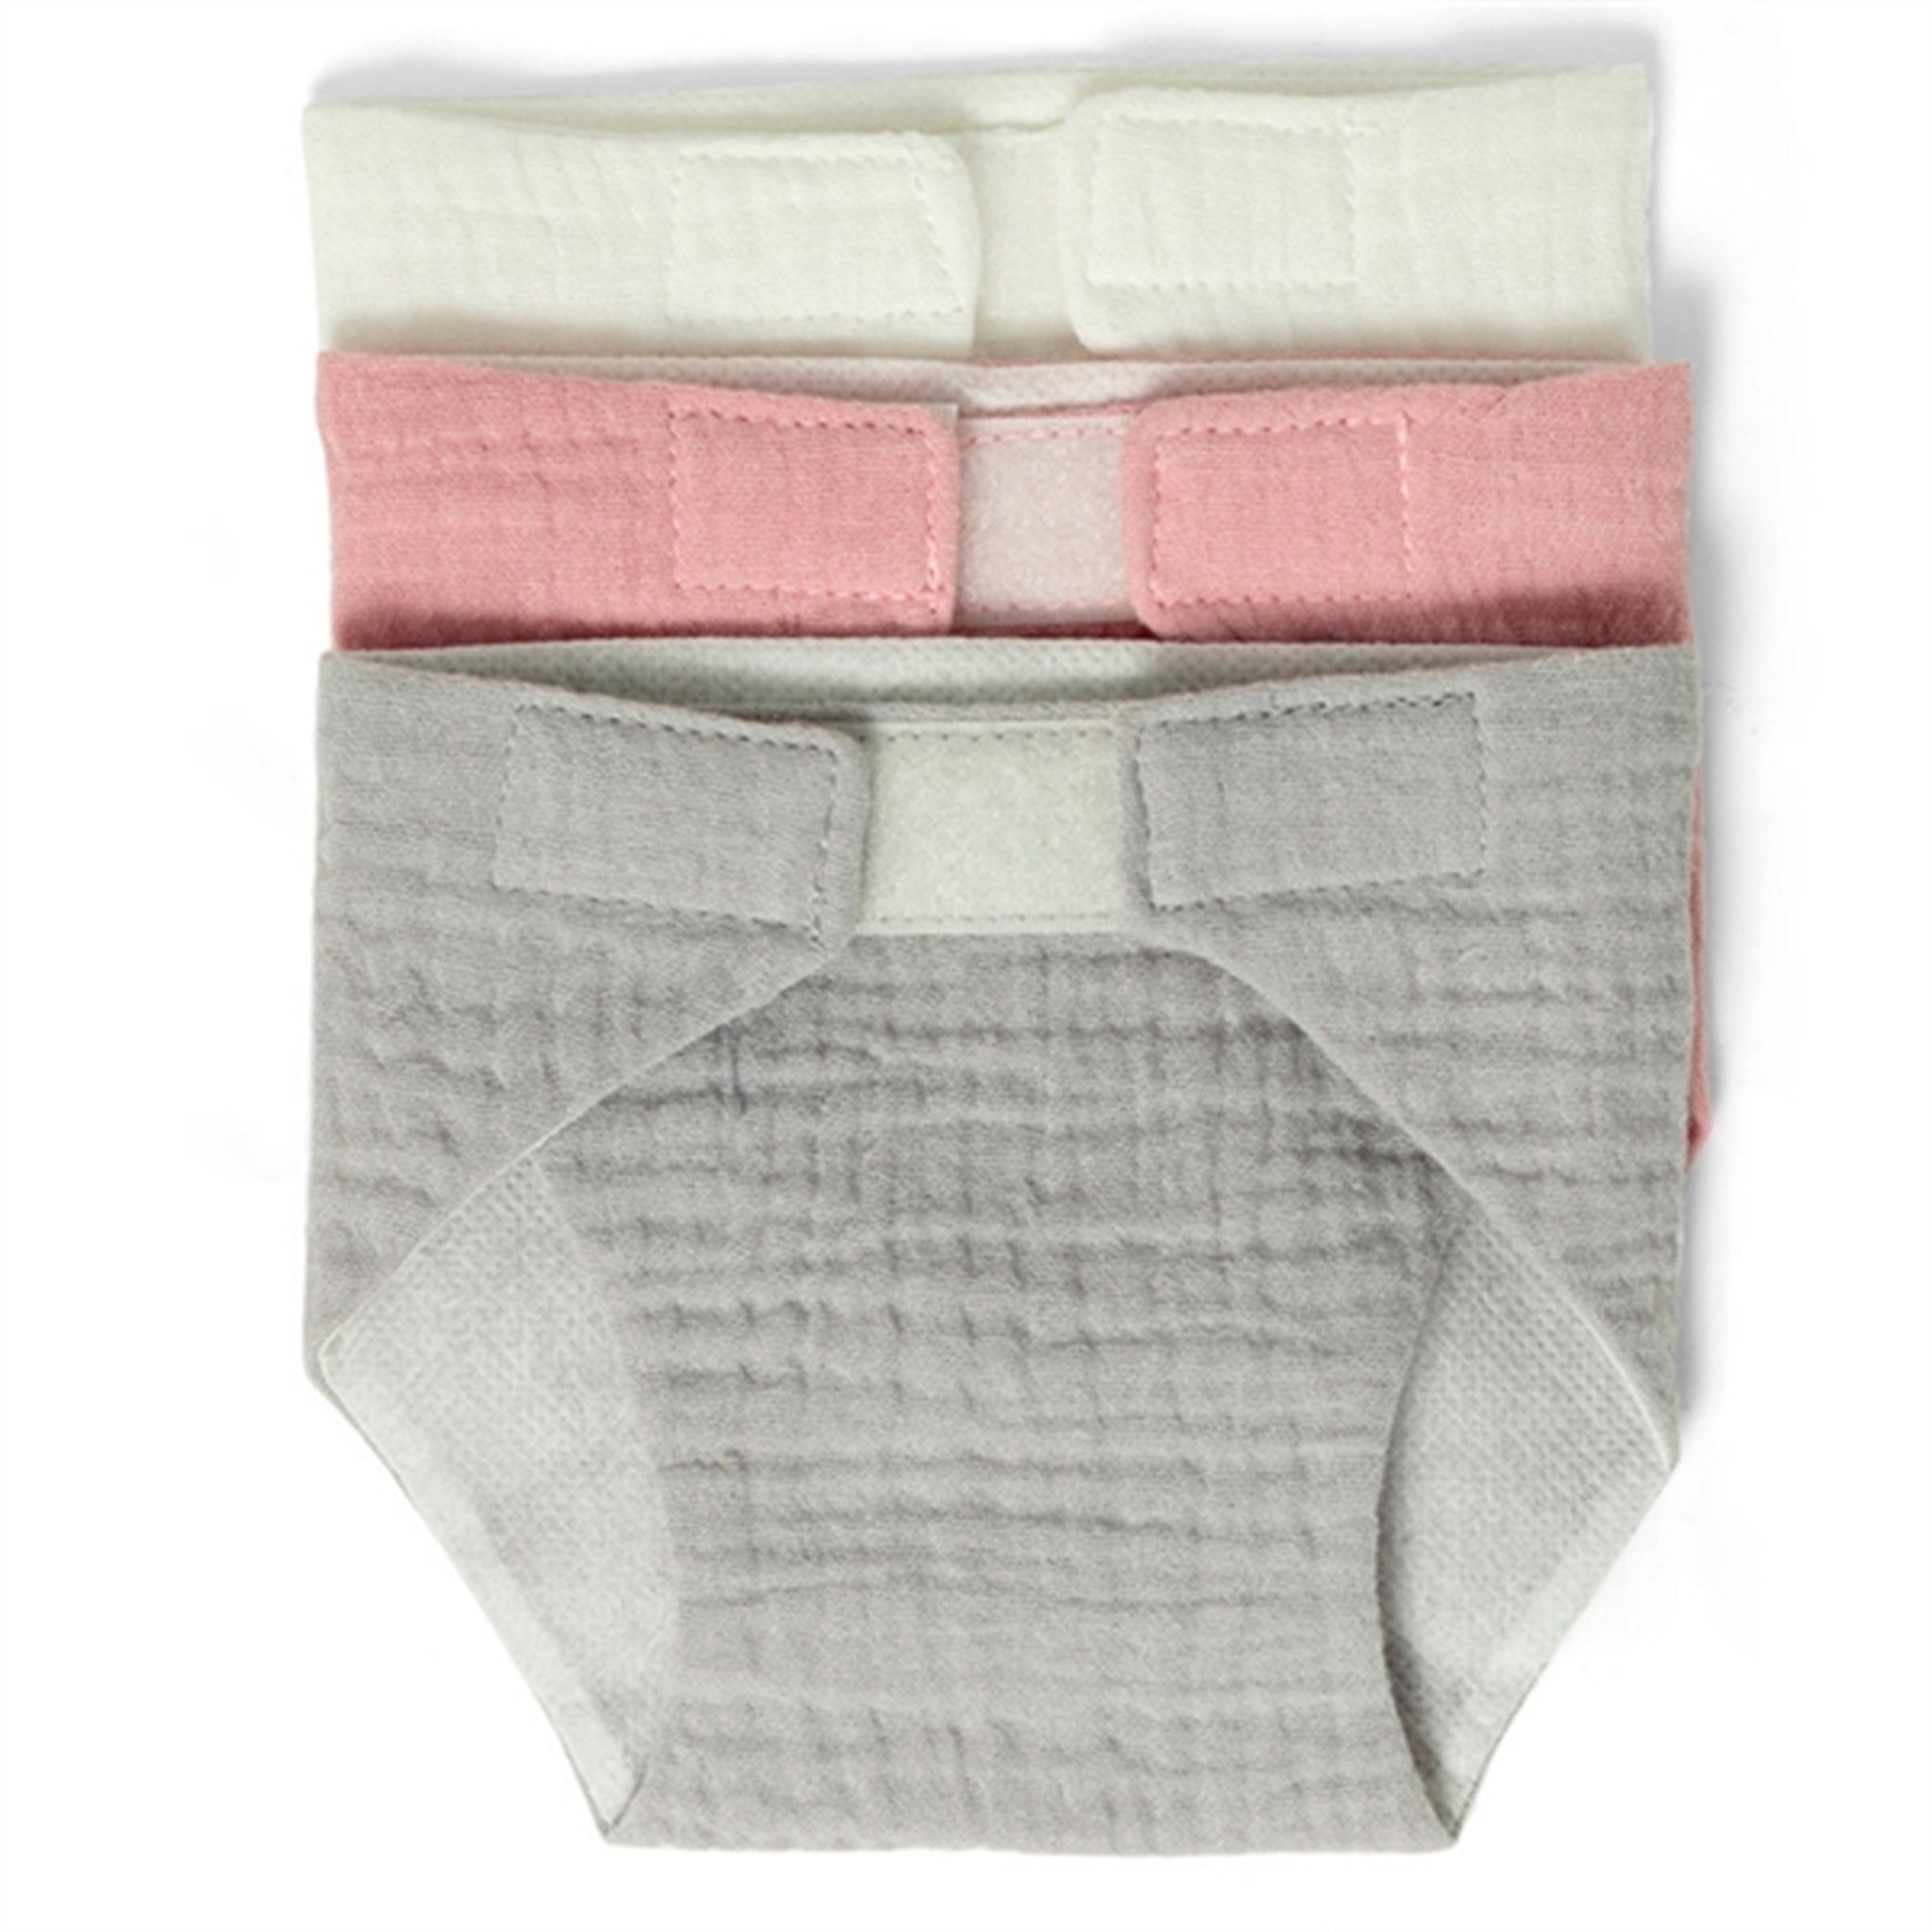 MaMaMeMo Doll Diapers 3 Colors